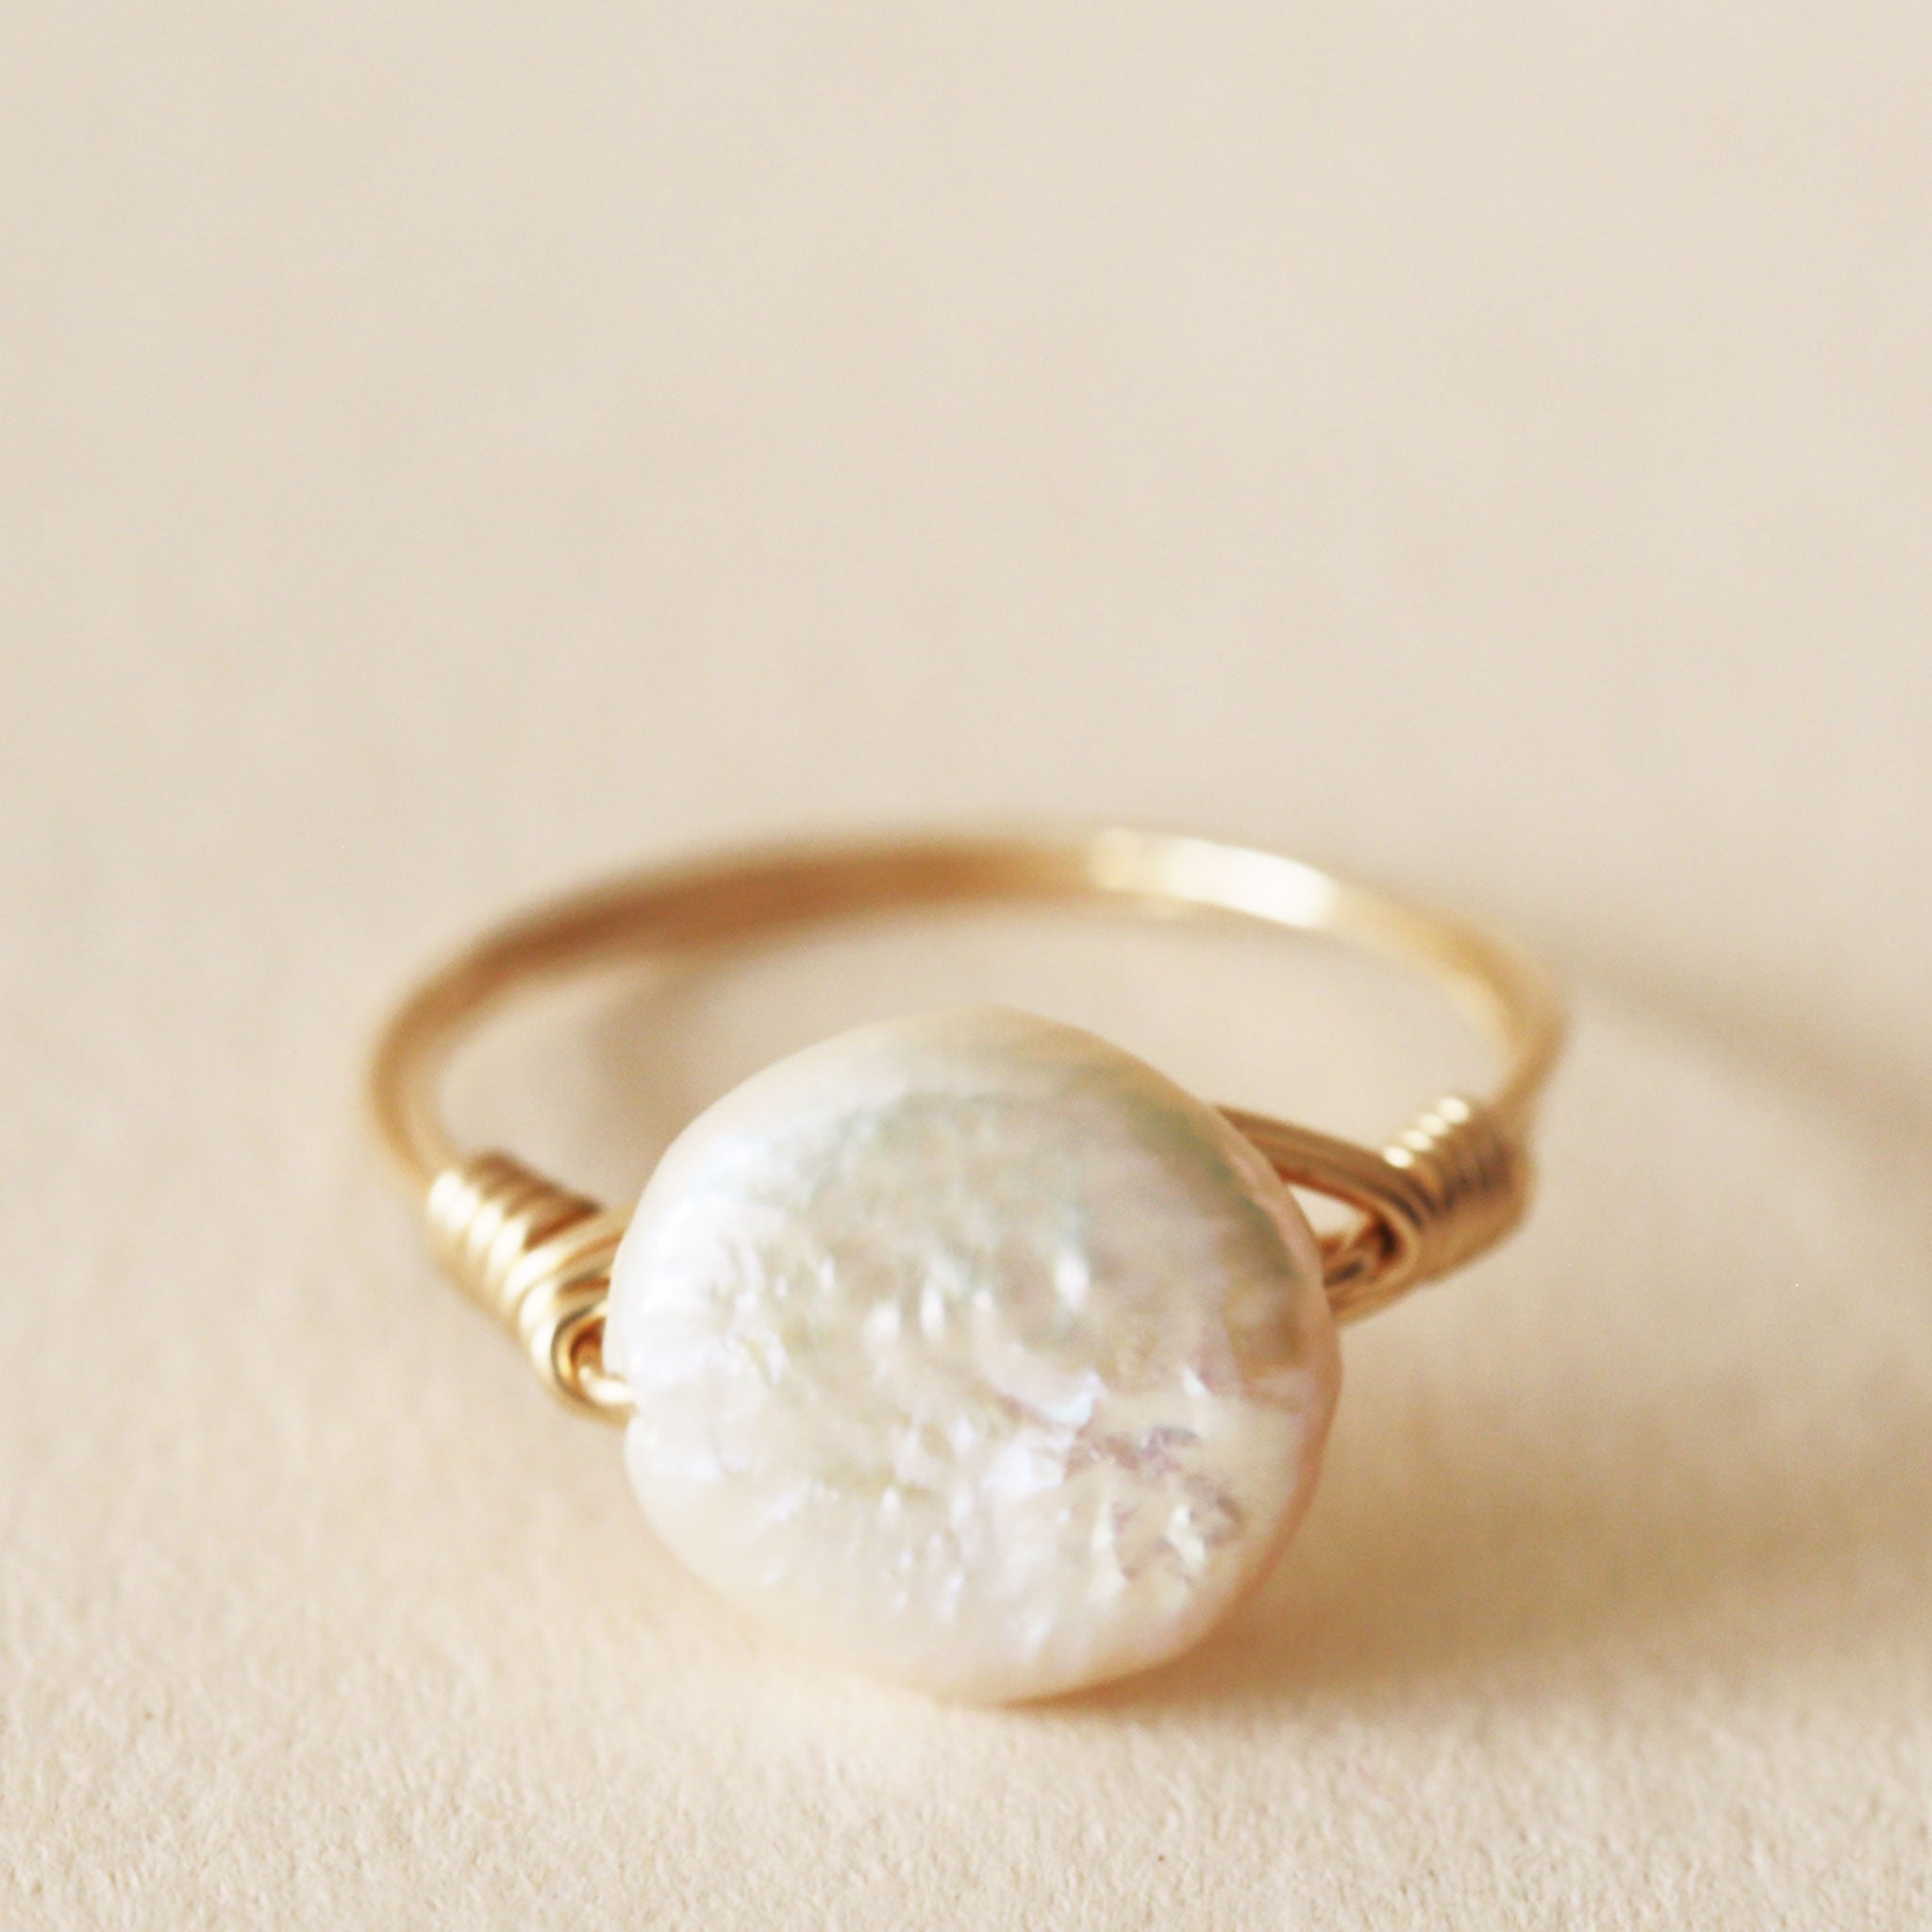 A gold ring, with a circle freshwater pearl in the center.